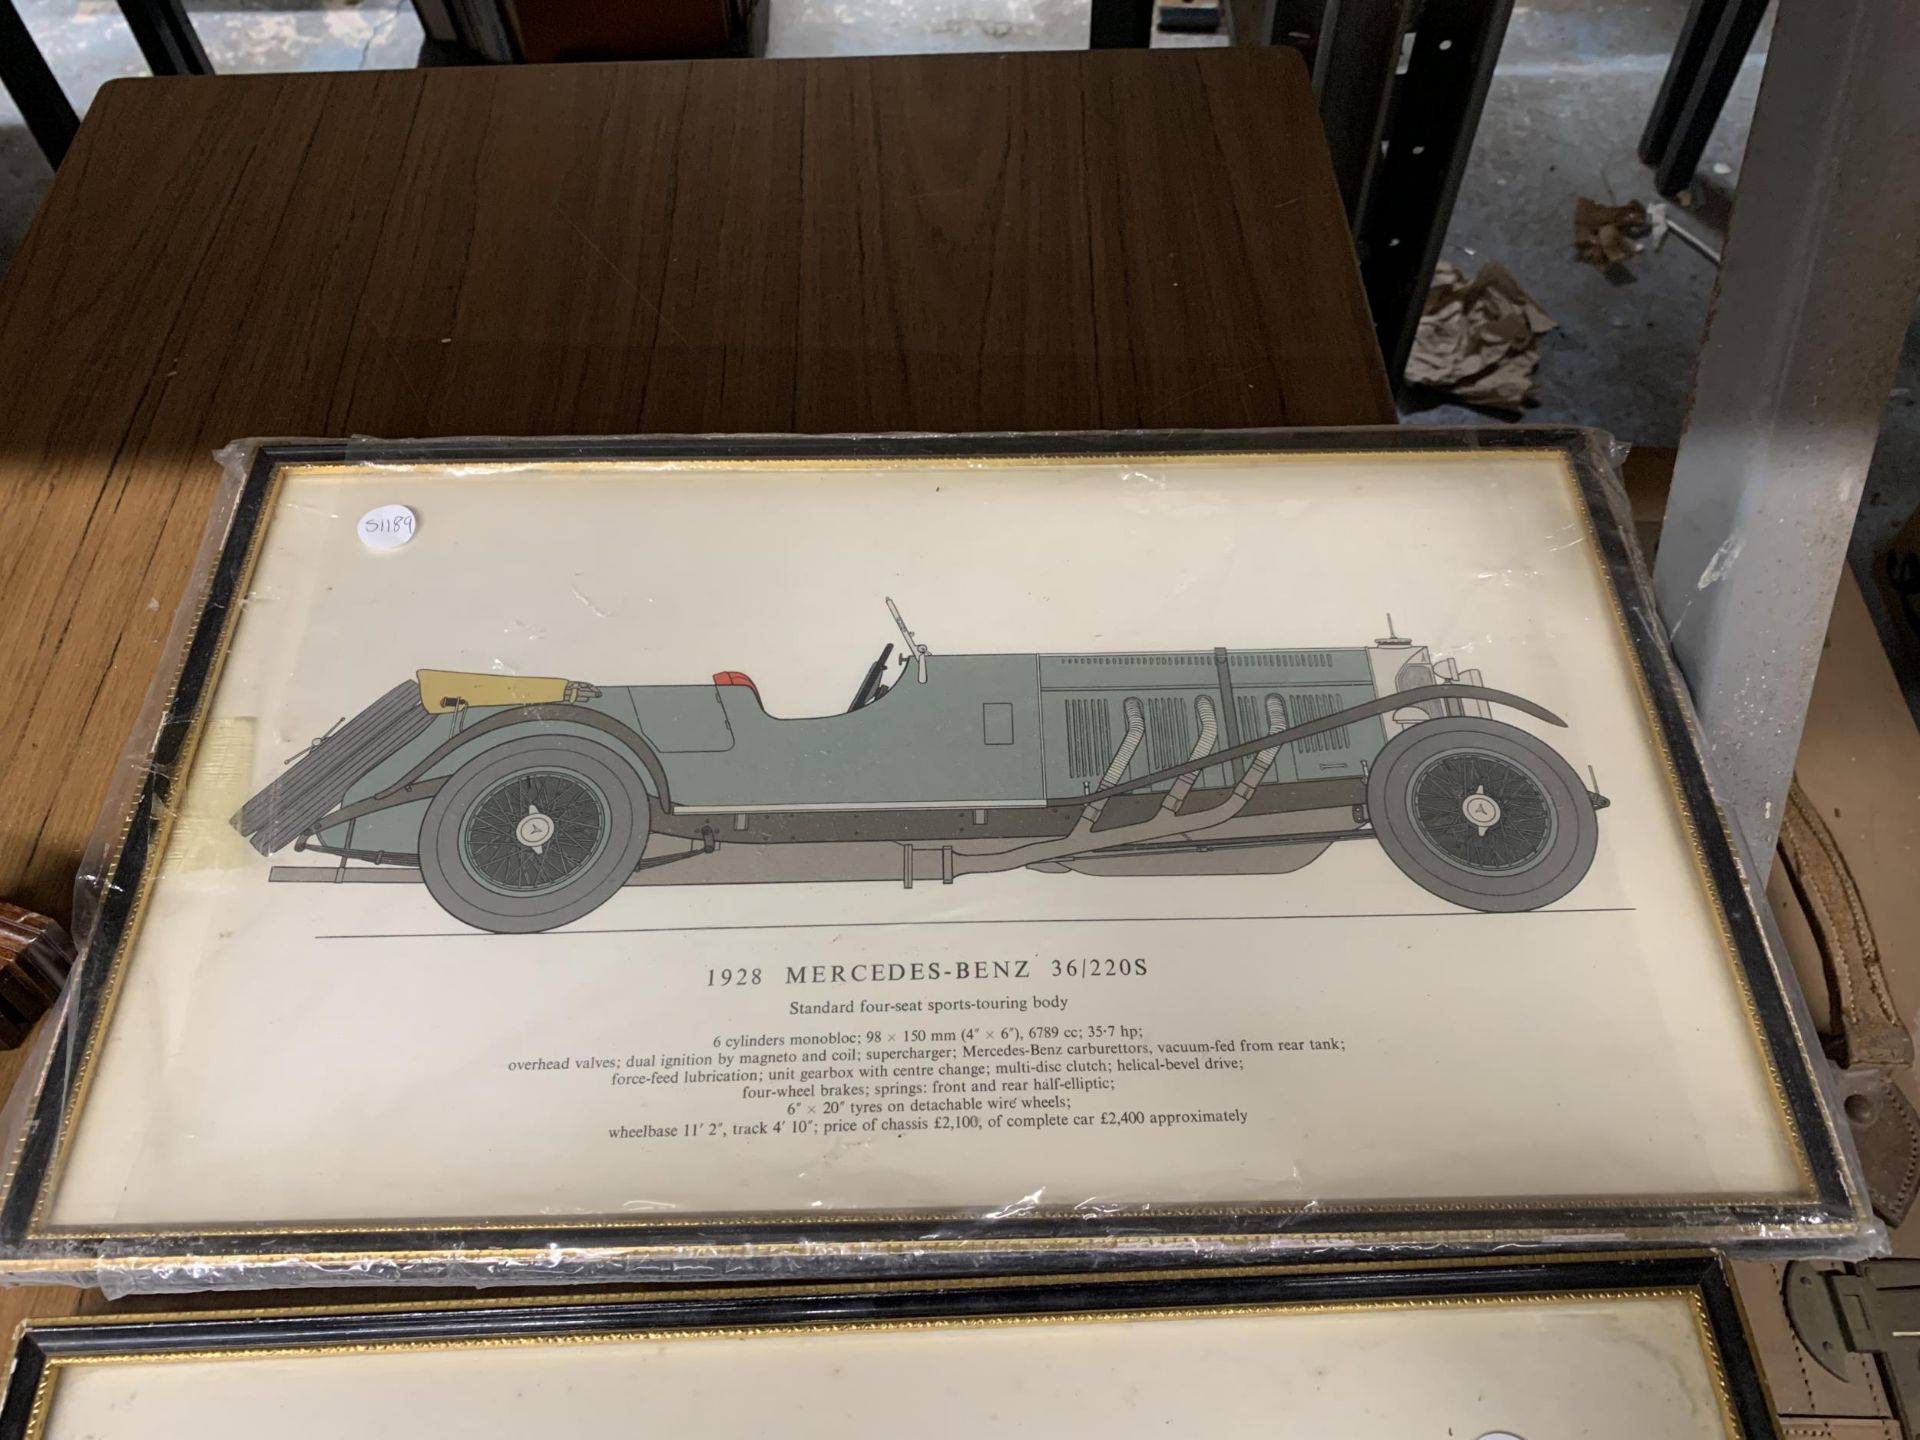 THREE FRAMED PRINTS OF VINTAGE CARS - 1926 BENTLEY 3 LITRE', 1927/28 VAUXHALL 30/98' AND '1928 - Image 2 of 6